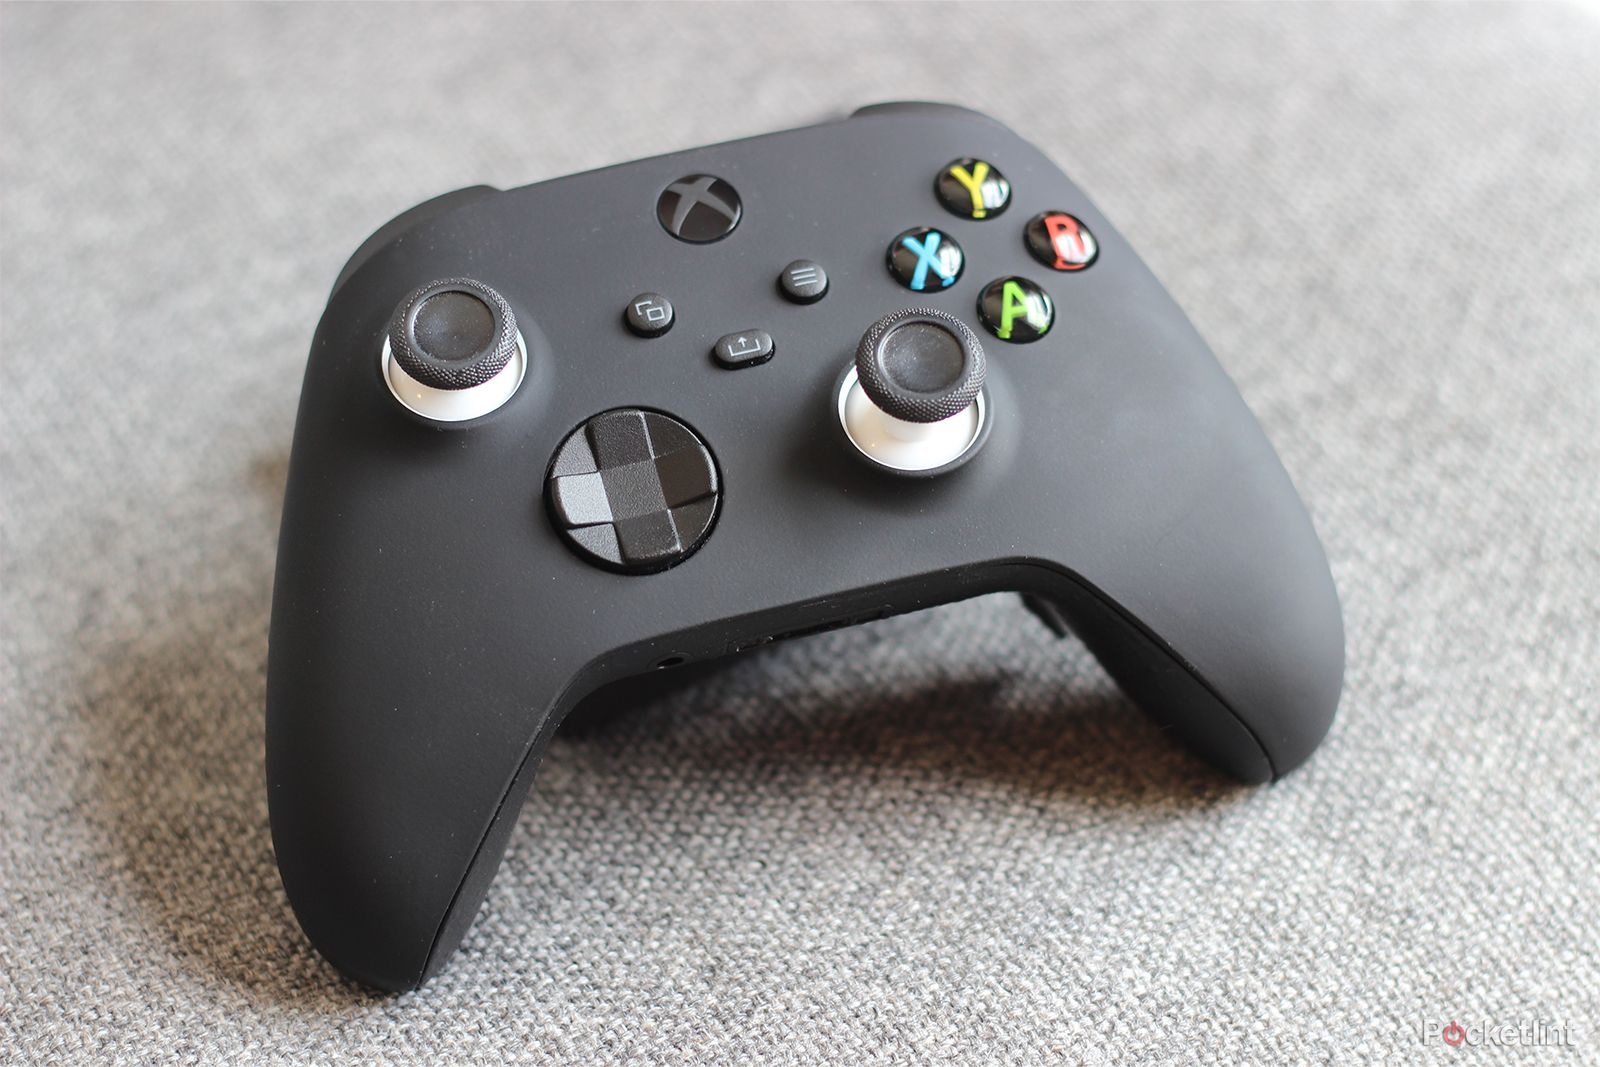 Xbox is blocking some third-party accessories - how to tell if yours